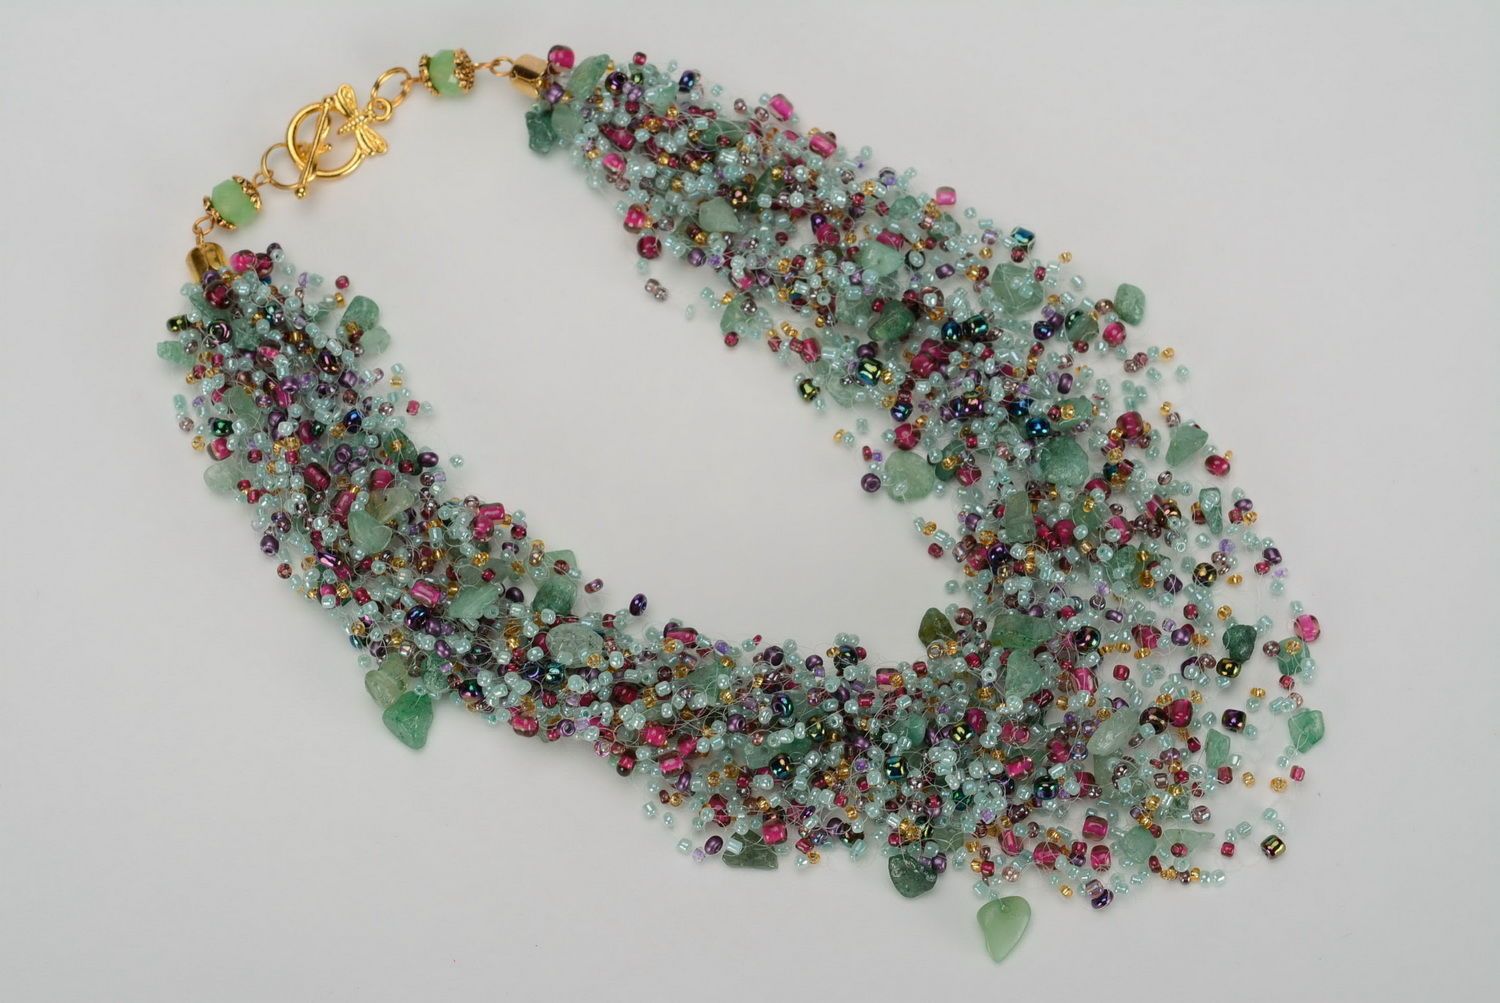 Handmade necklace, made of beads and natural gems photo 1